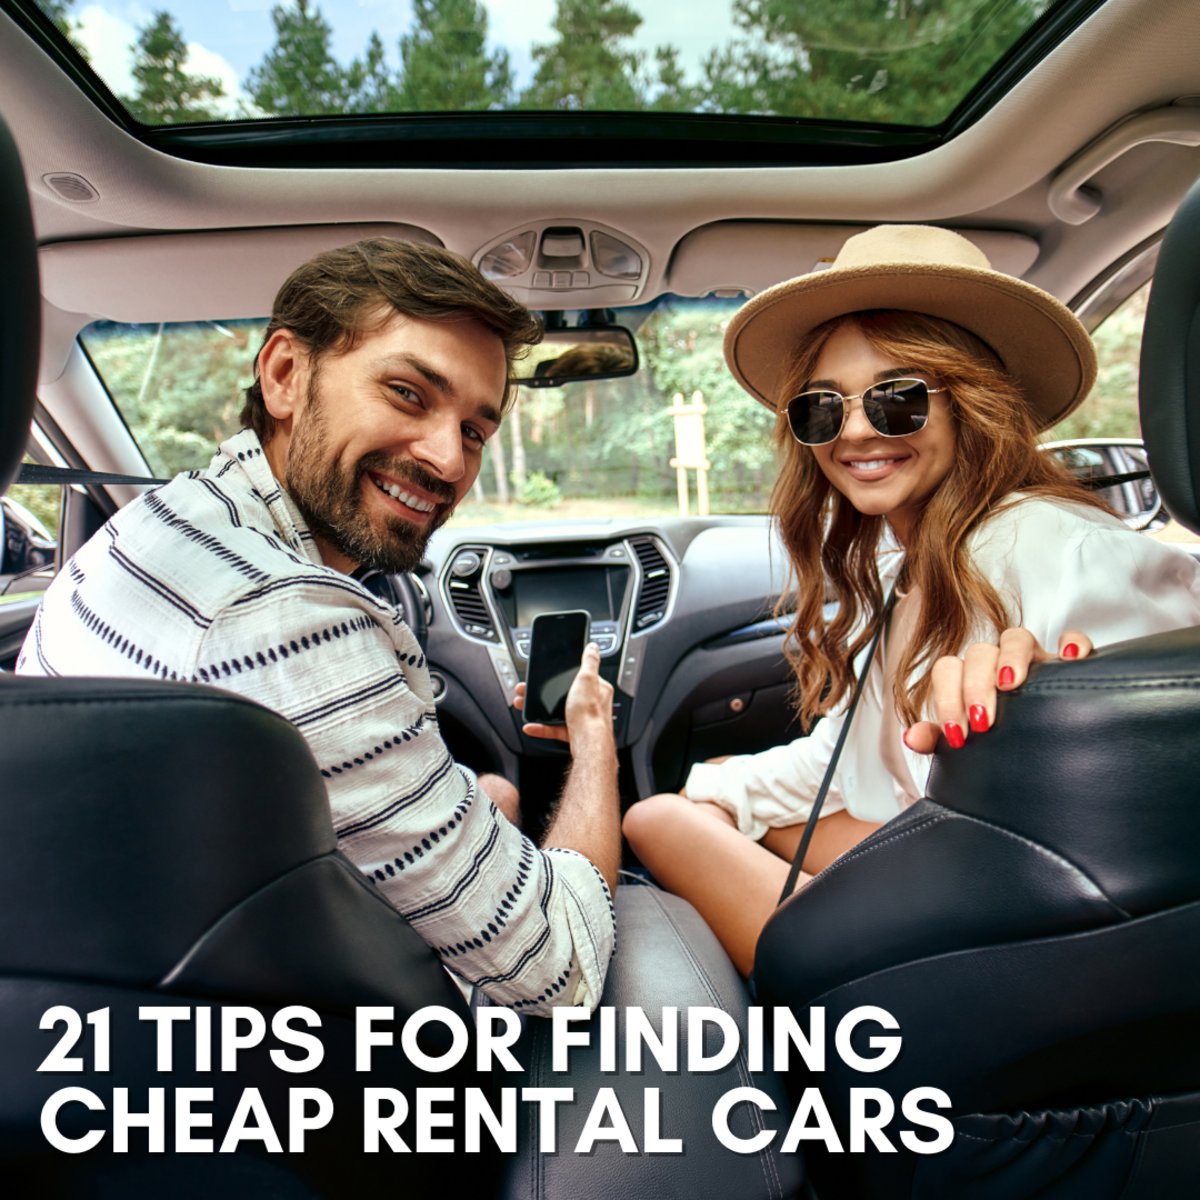 Planning on hitting the open road on your way to Washington? 🚗 Read these 21 tips for scoring sweet deals on #rentalcars so that you can explore without breaking the bank. bit.ly/3uBCqBJ #roadtrip #savvytraveler